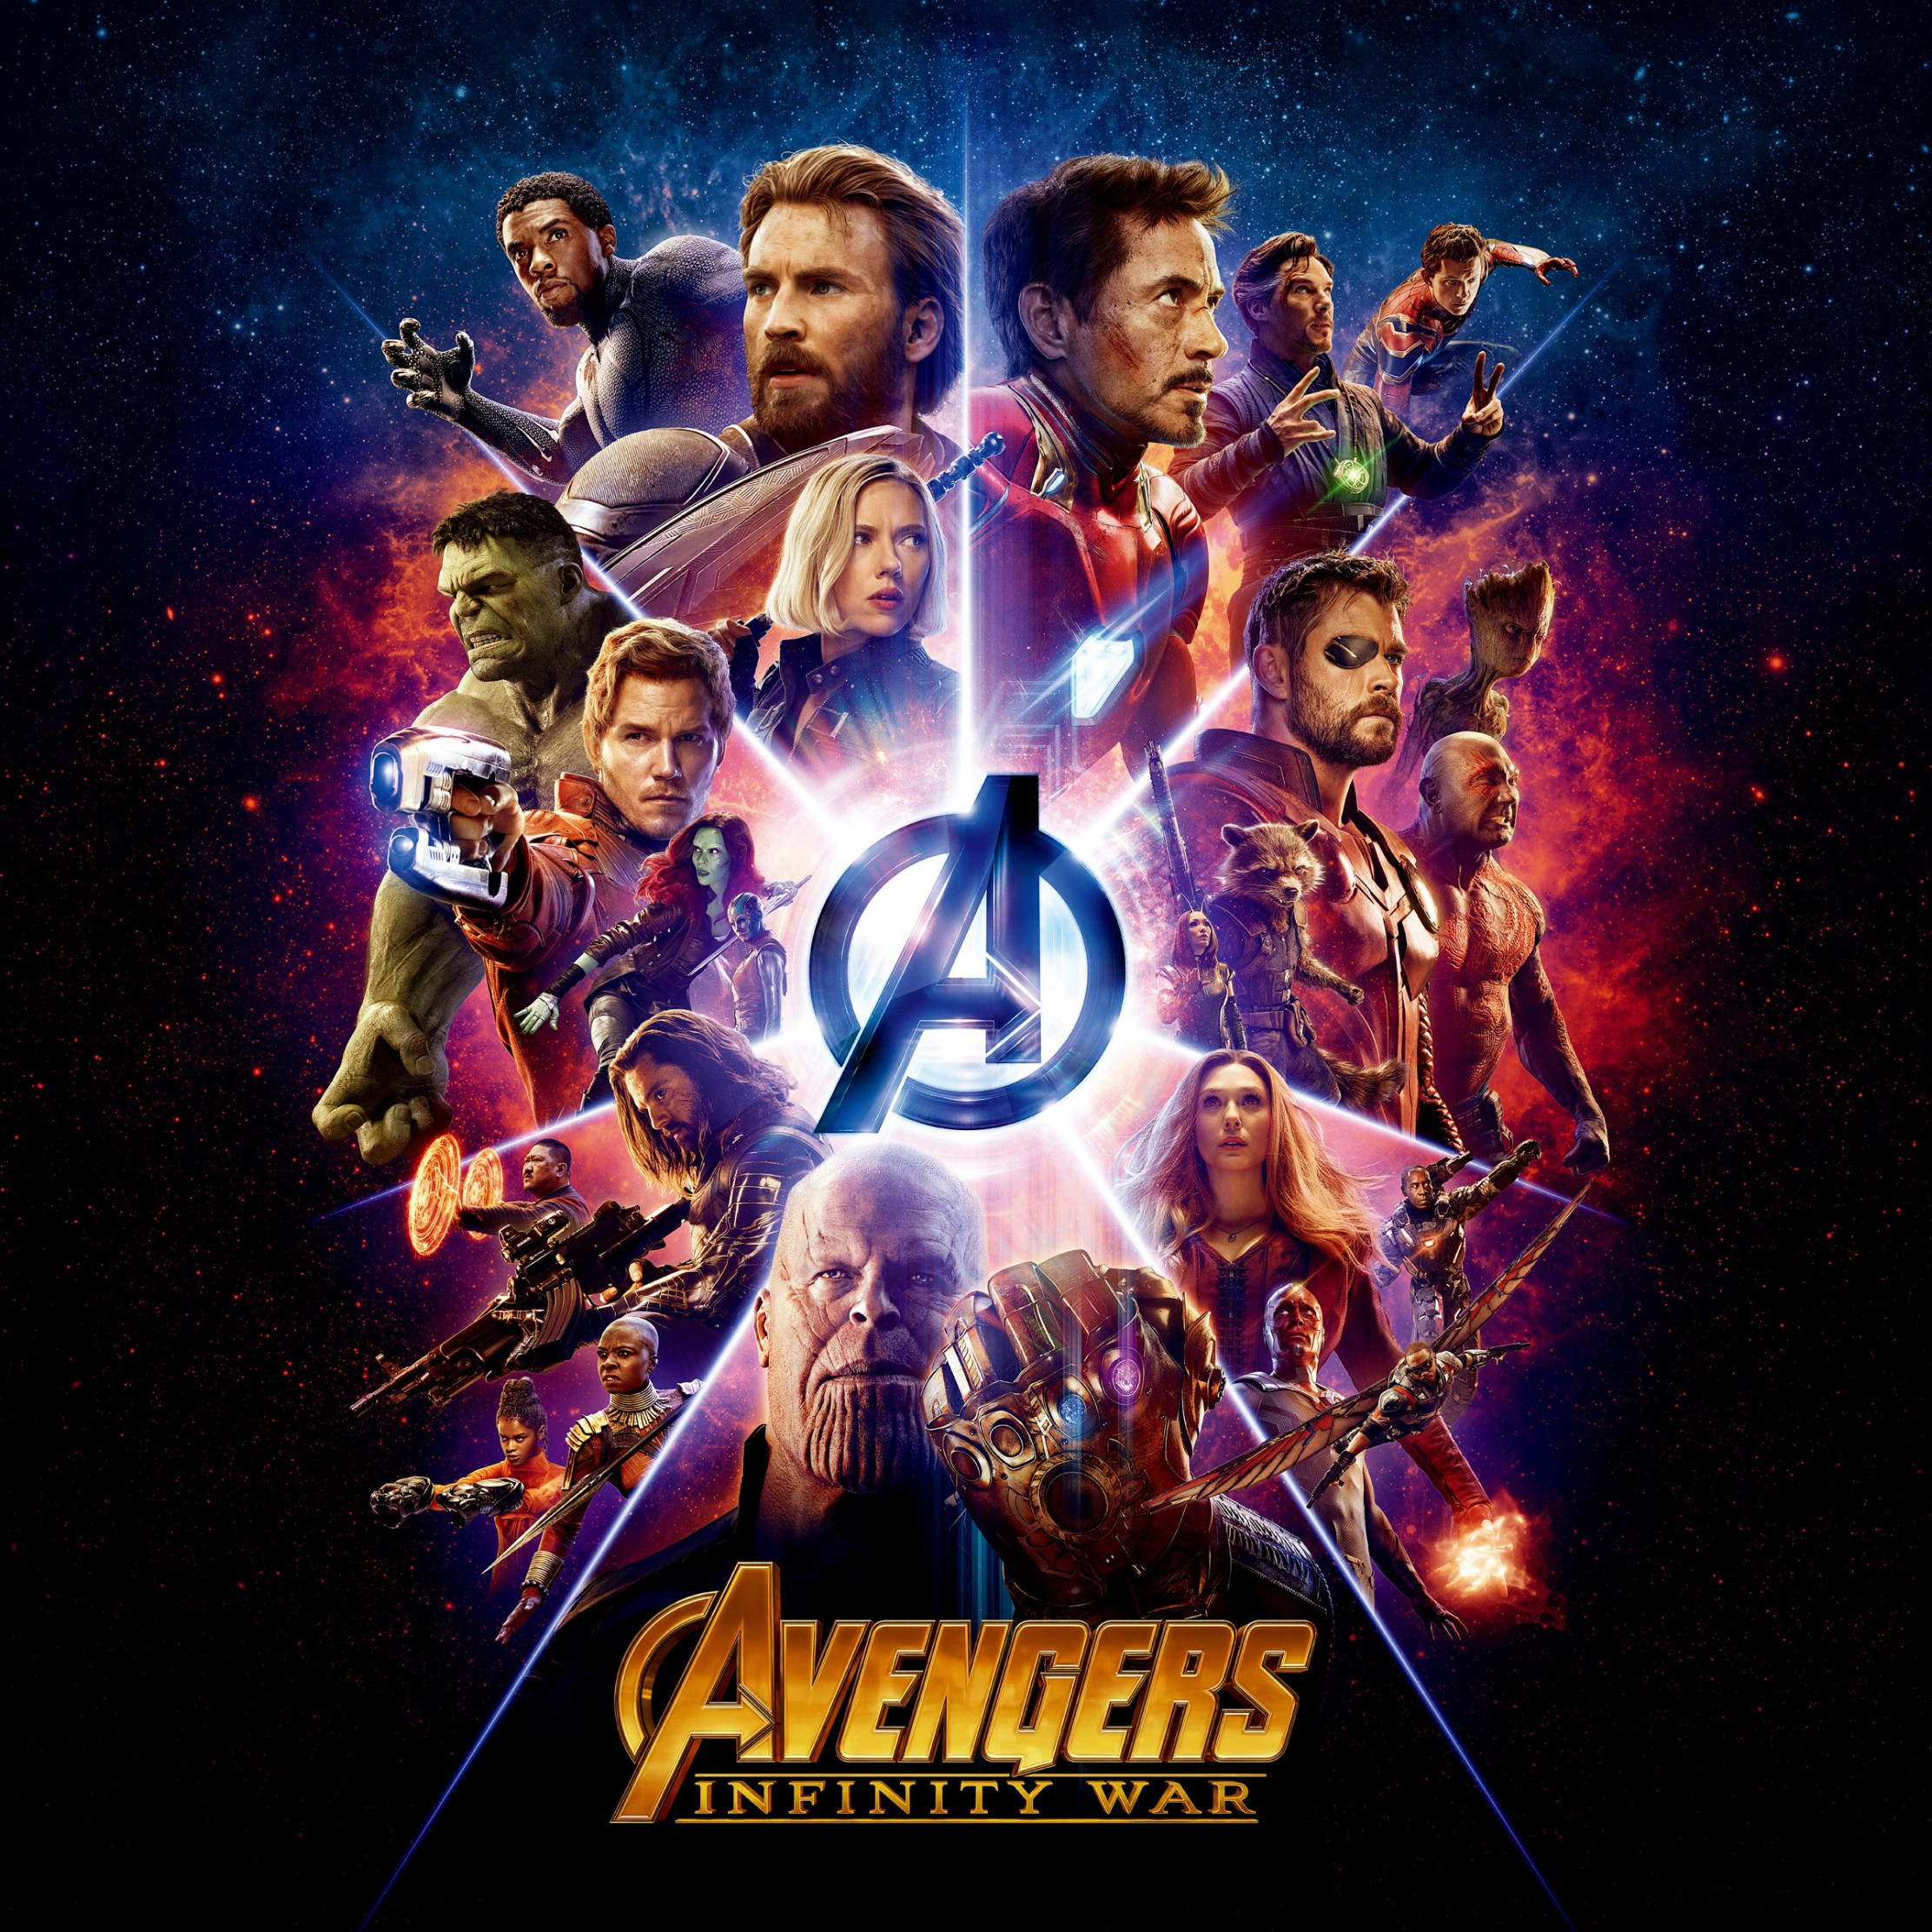 All the heroes from Avengers: Infinity War wallpaper 2224x2224